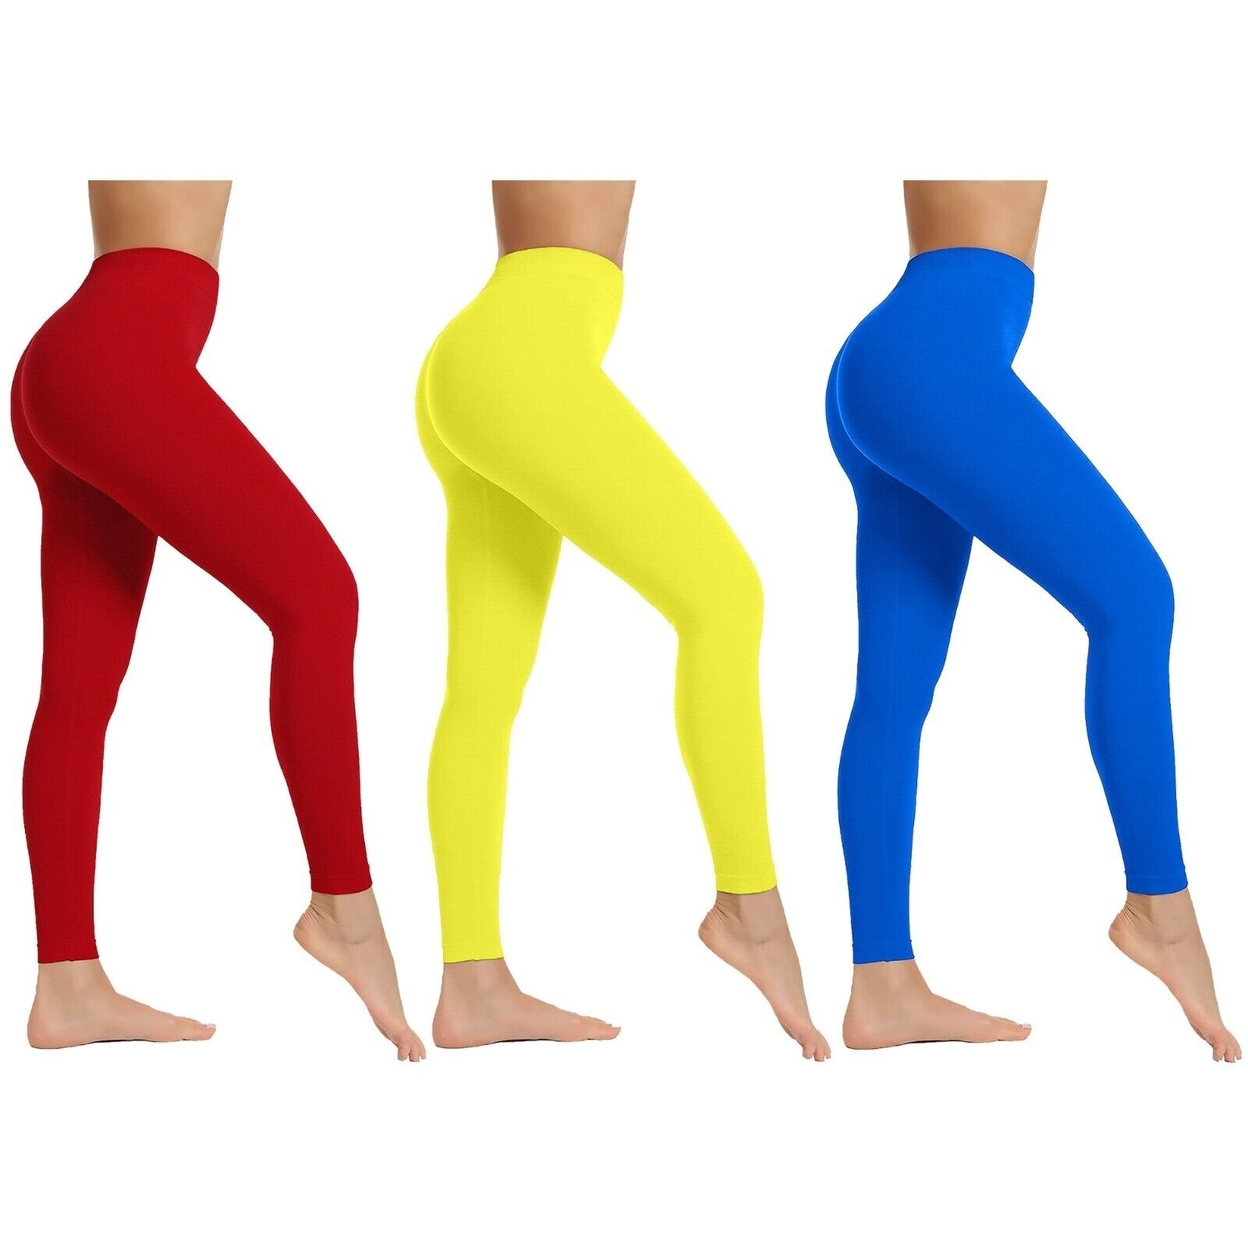 Women's High Waist Super-Soft Active Athlete Stretch Yoga Cozy Leggings - Red, X-large